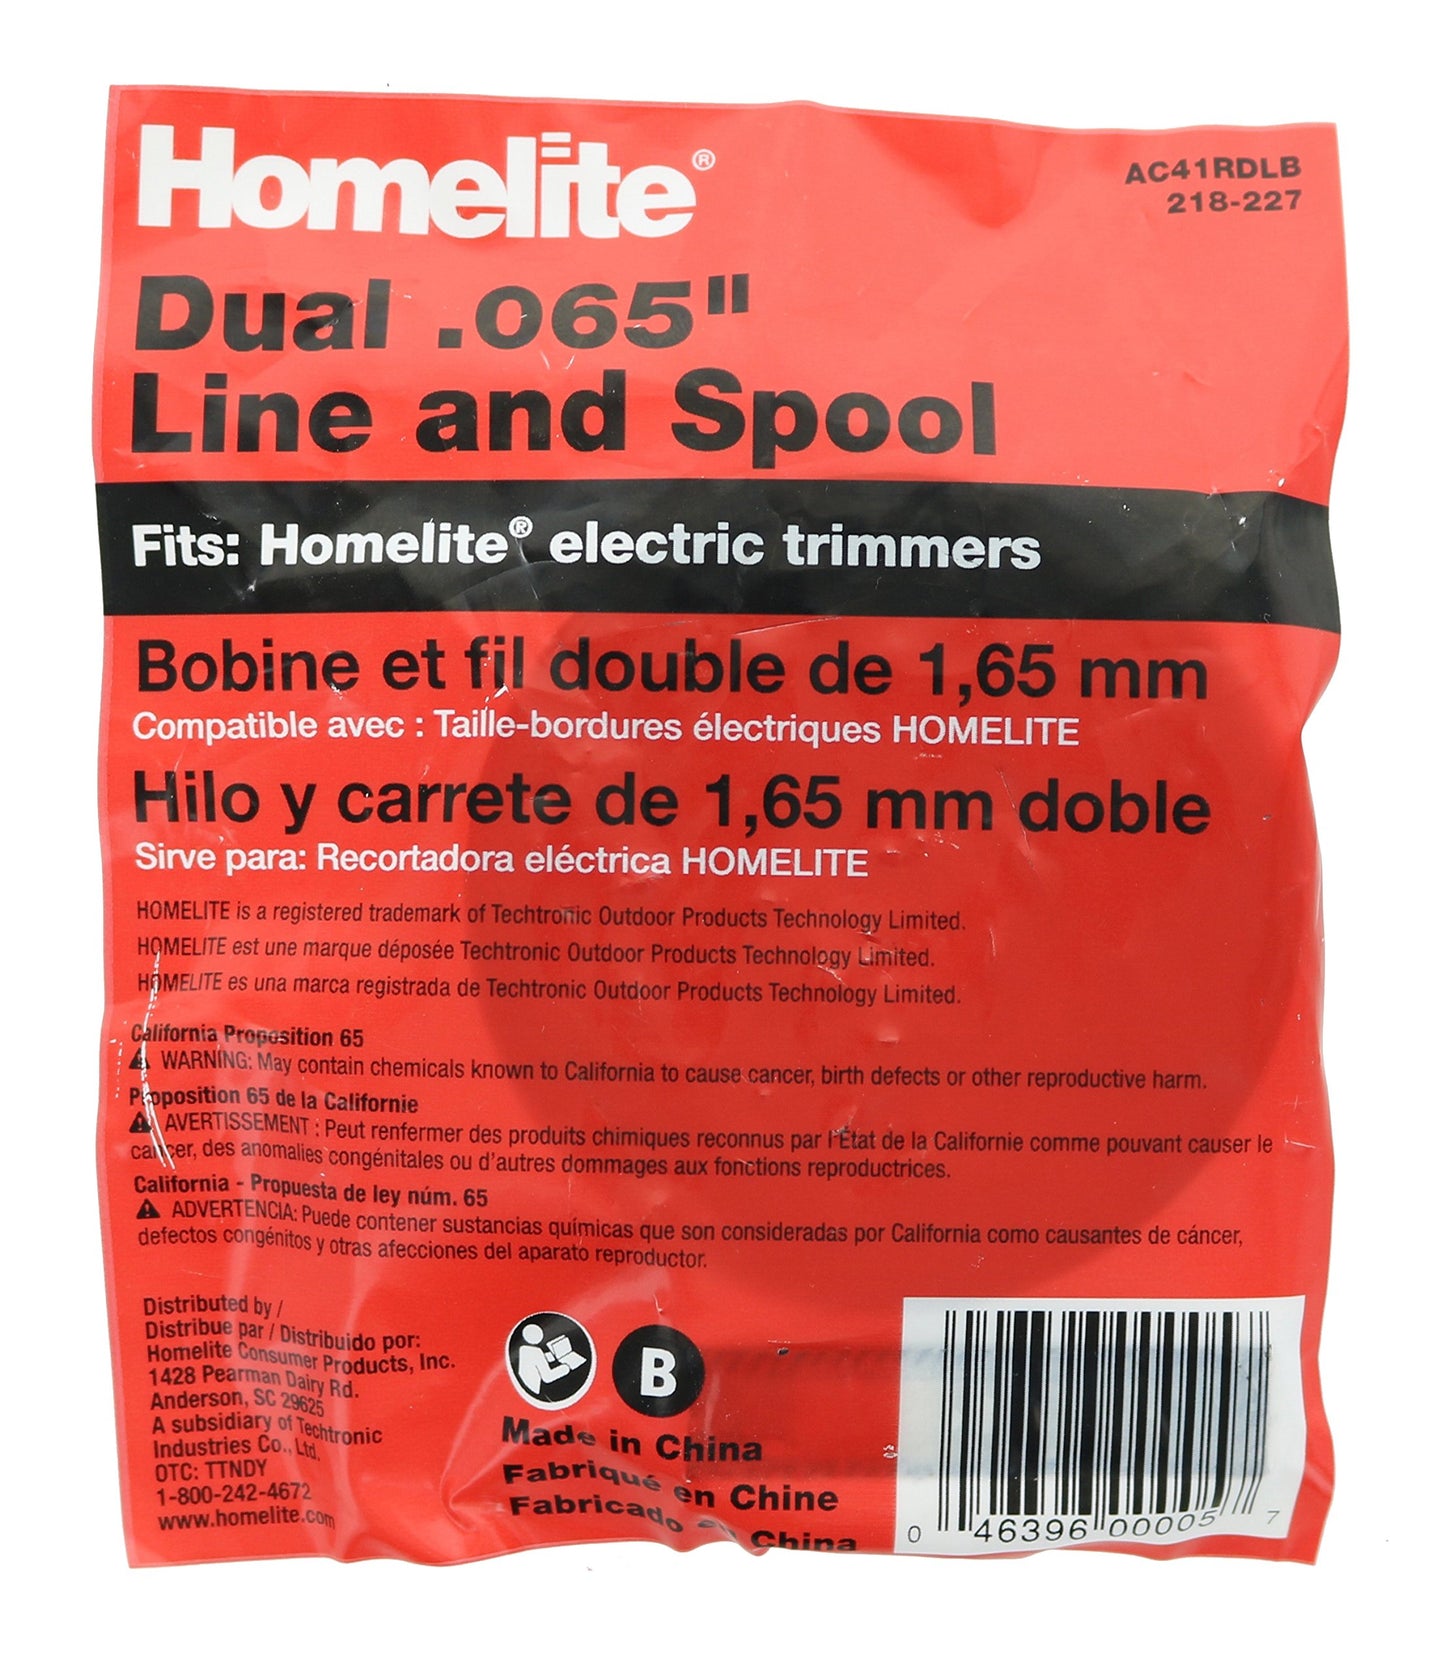 Homelite Genuine OEM AC41RDLB Autofeed Dual .065” Replacement Line and Spool Pack for Homelite Electric String Trimmers (Single Pack)